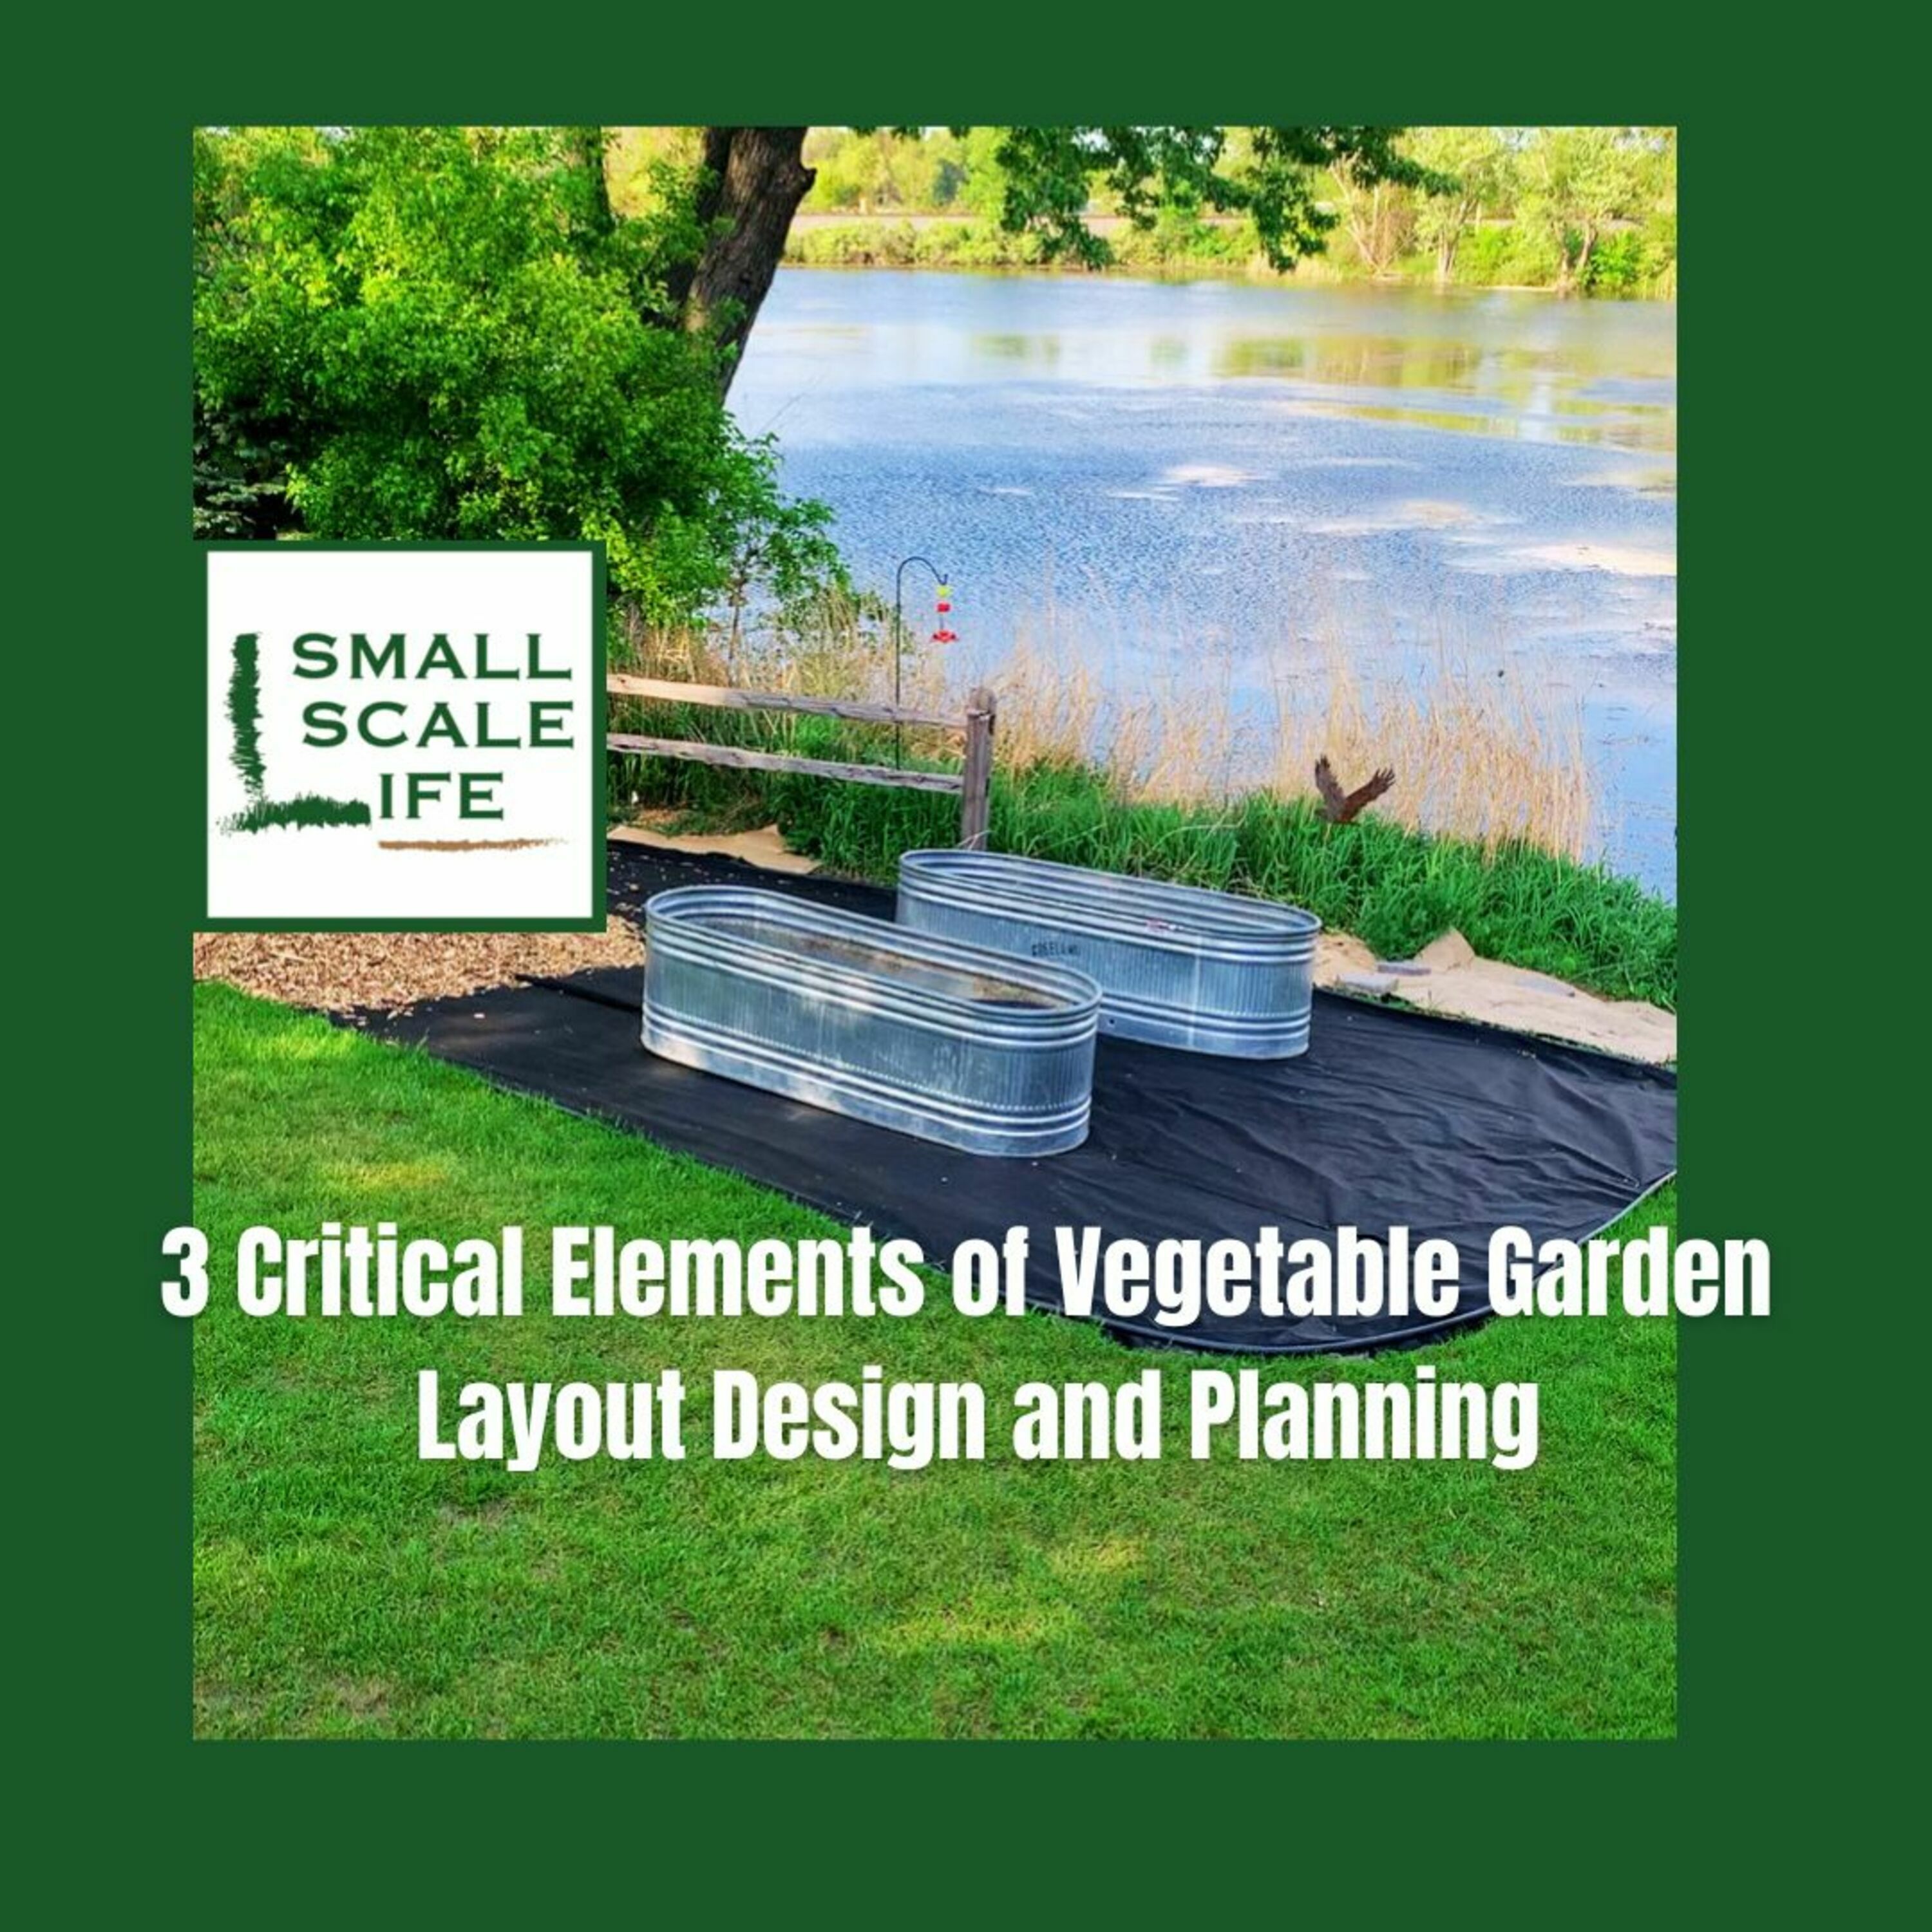 3 Critical Elements of Vegetable Garden Layout Design and Planning